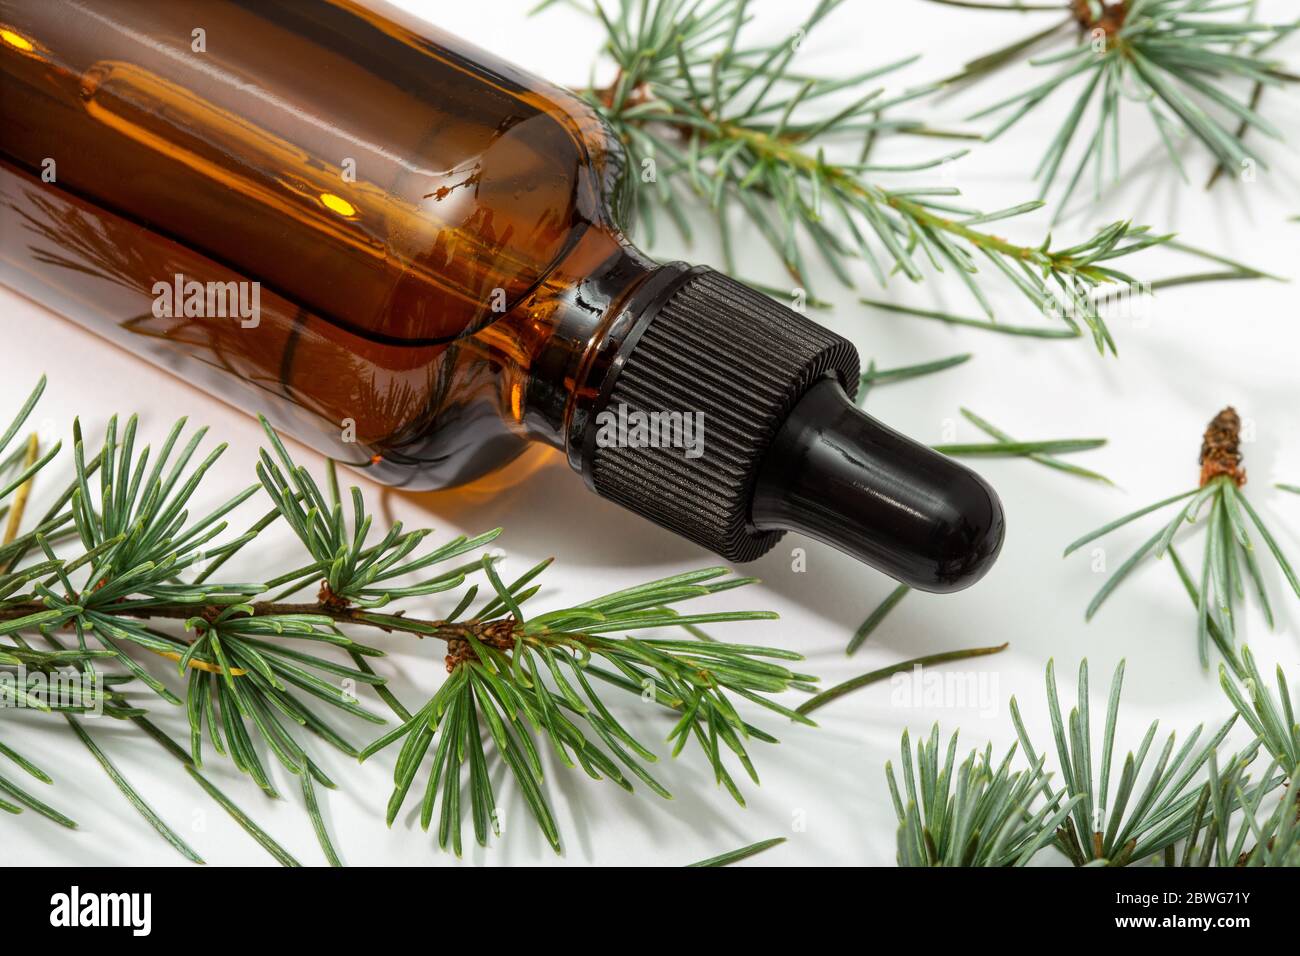 Fir essential oil. Fir oil for skin care, spa, wellness, massage, aromatherapy and natural medicine Stock Photo